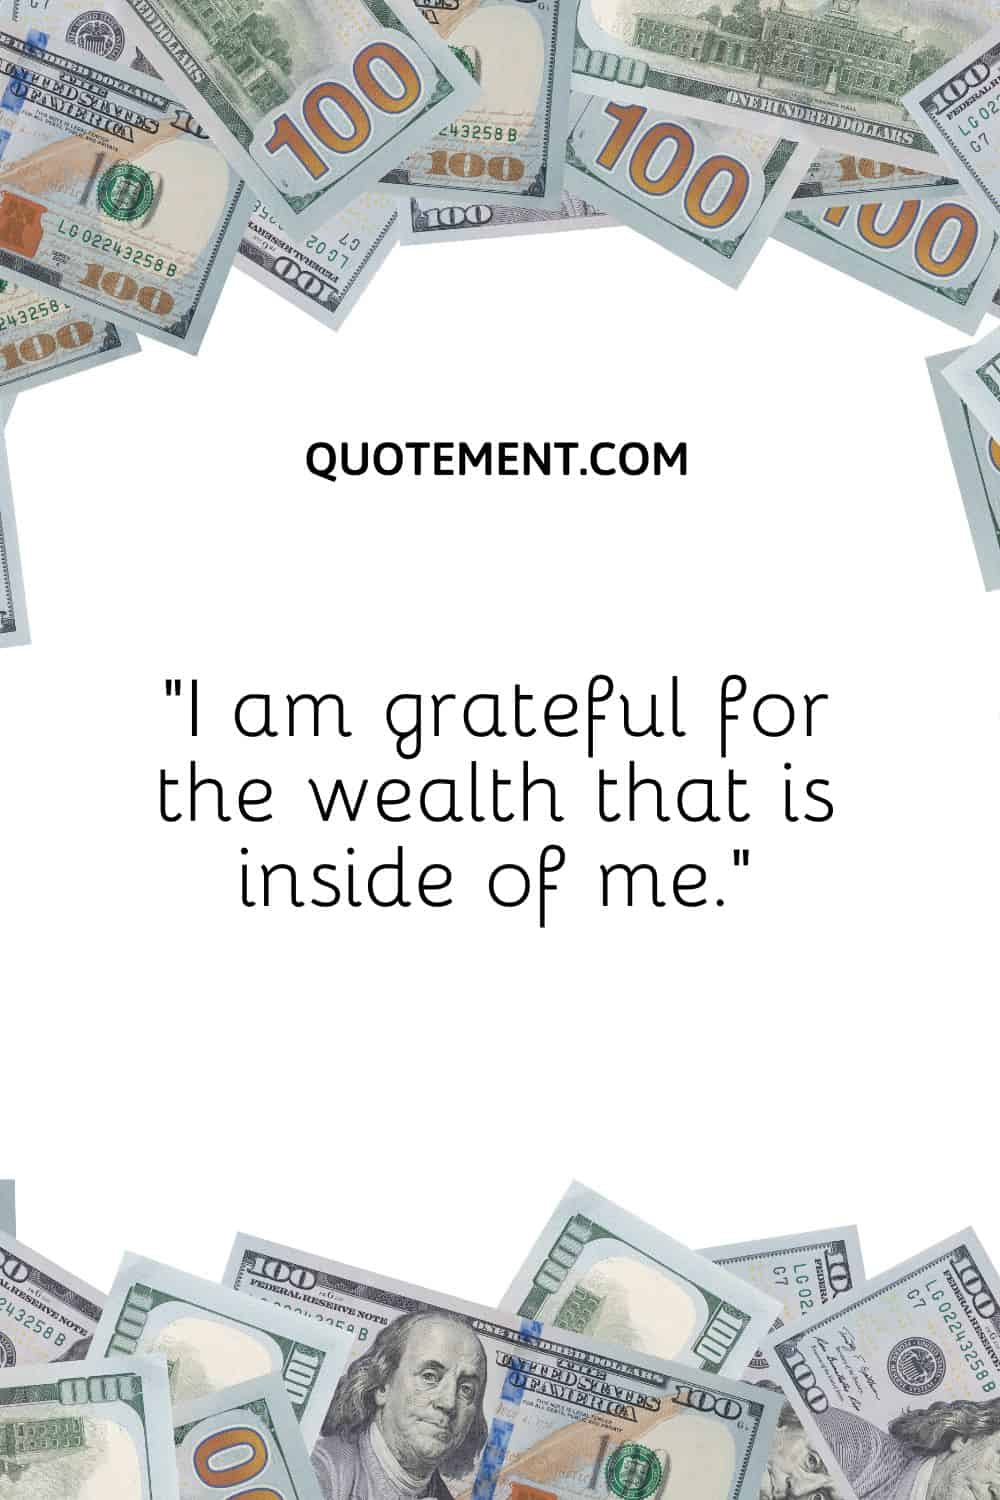 “I am grateful for the wealth that is inside of me.”